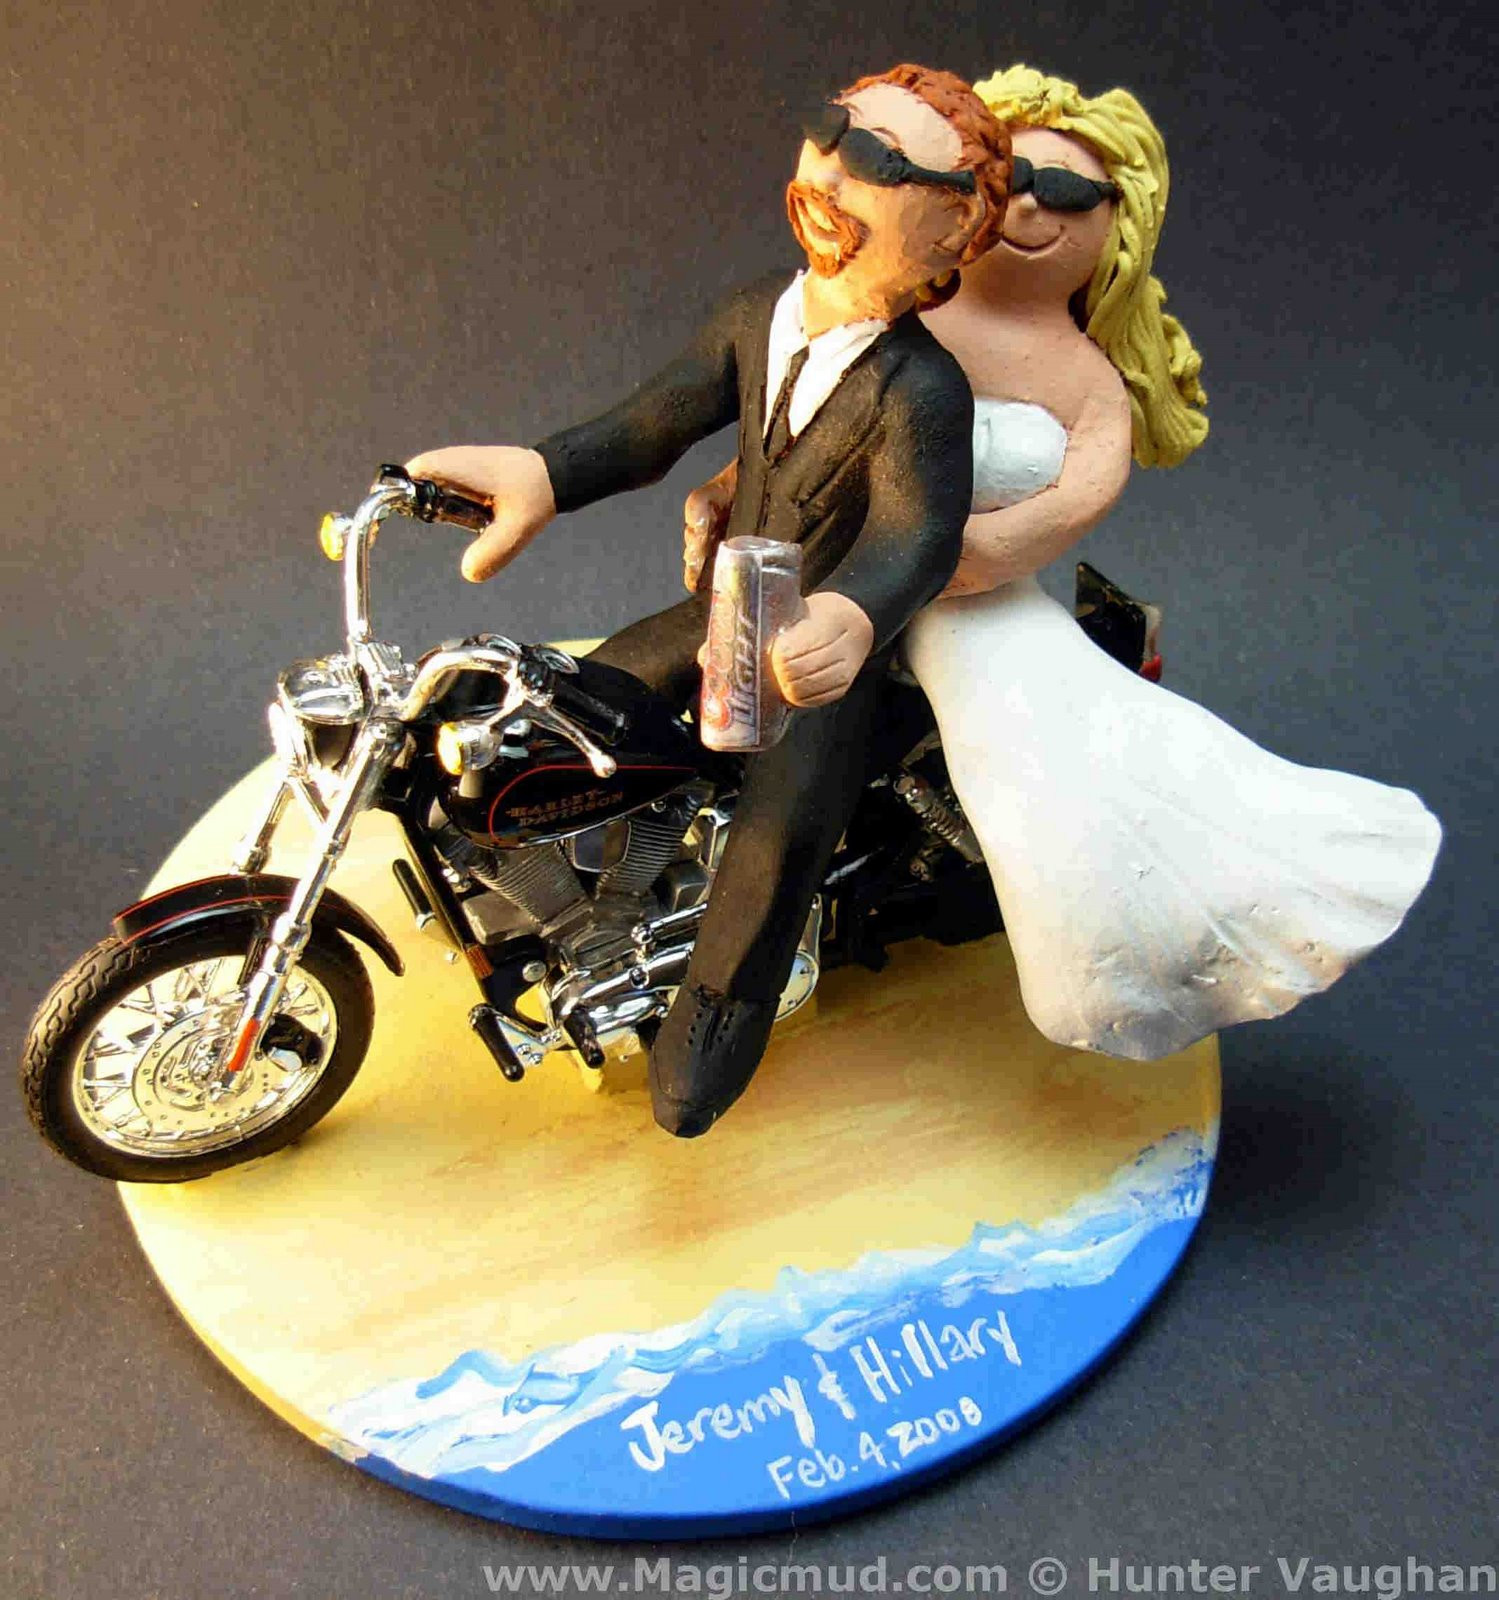 Motorcycle Cake Toppers For Wedding Cakes
 wedding cake toppers Motorcycle Wedding Cake Toppers